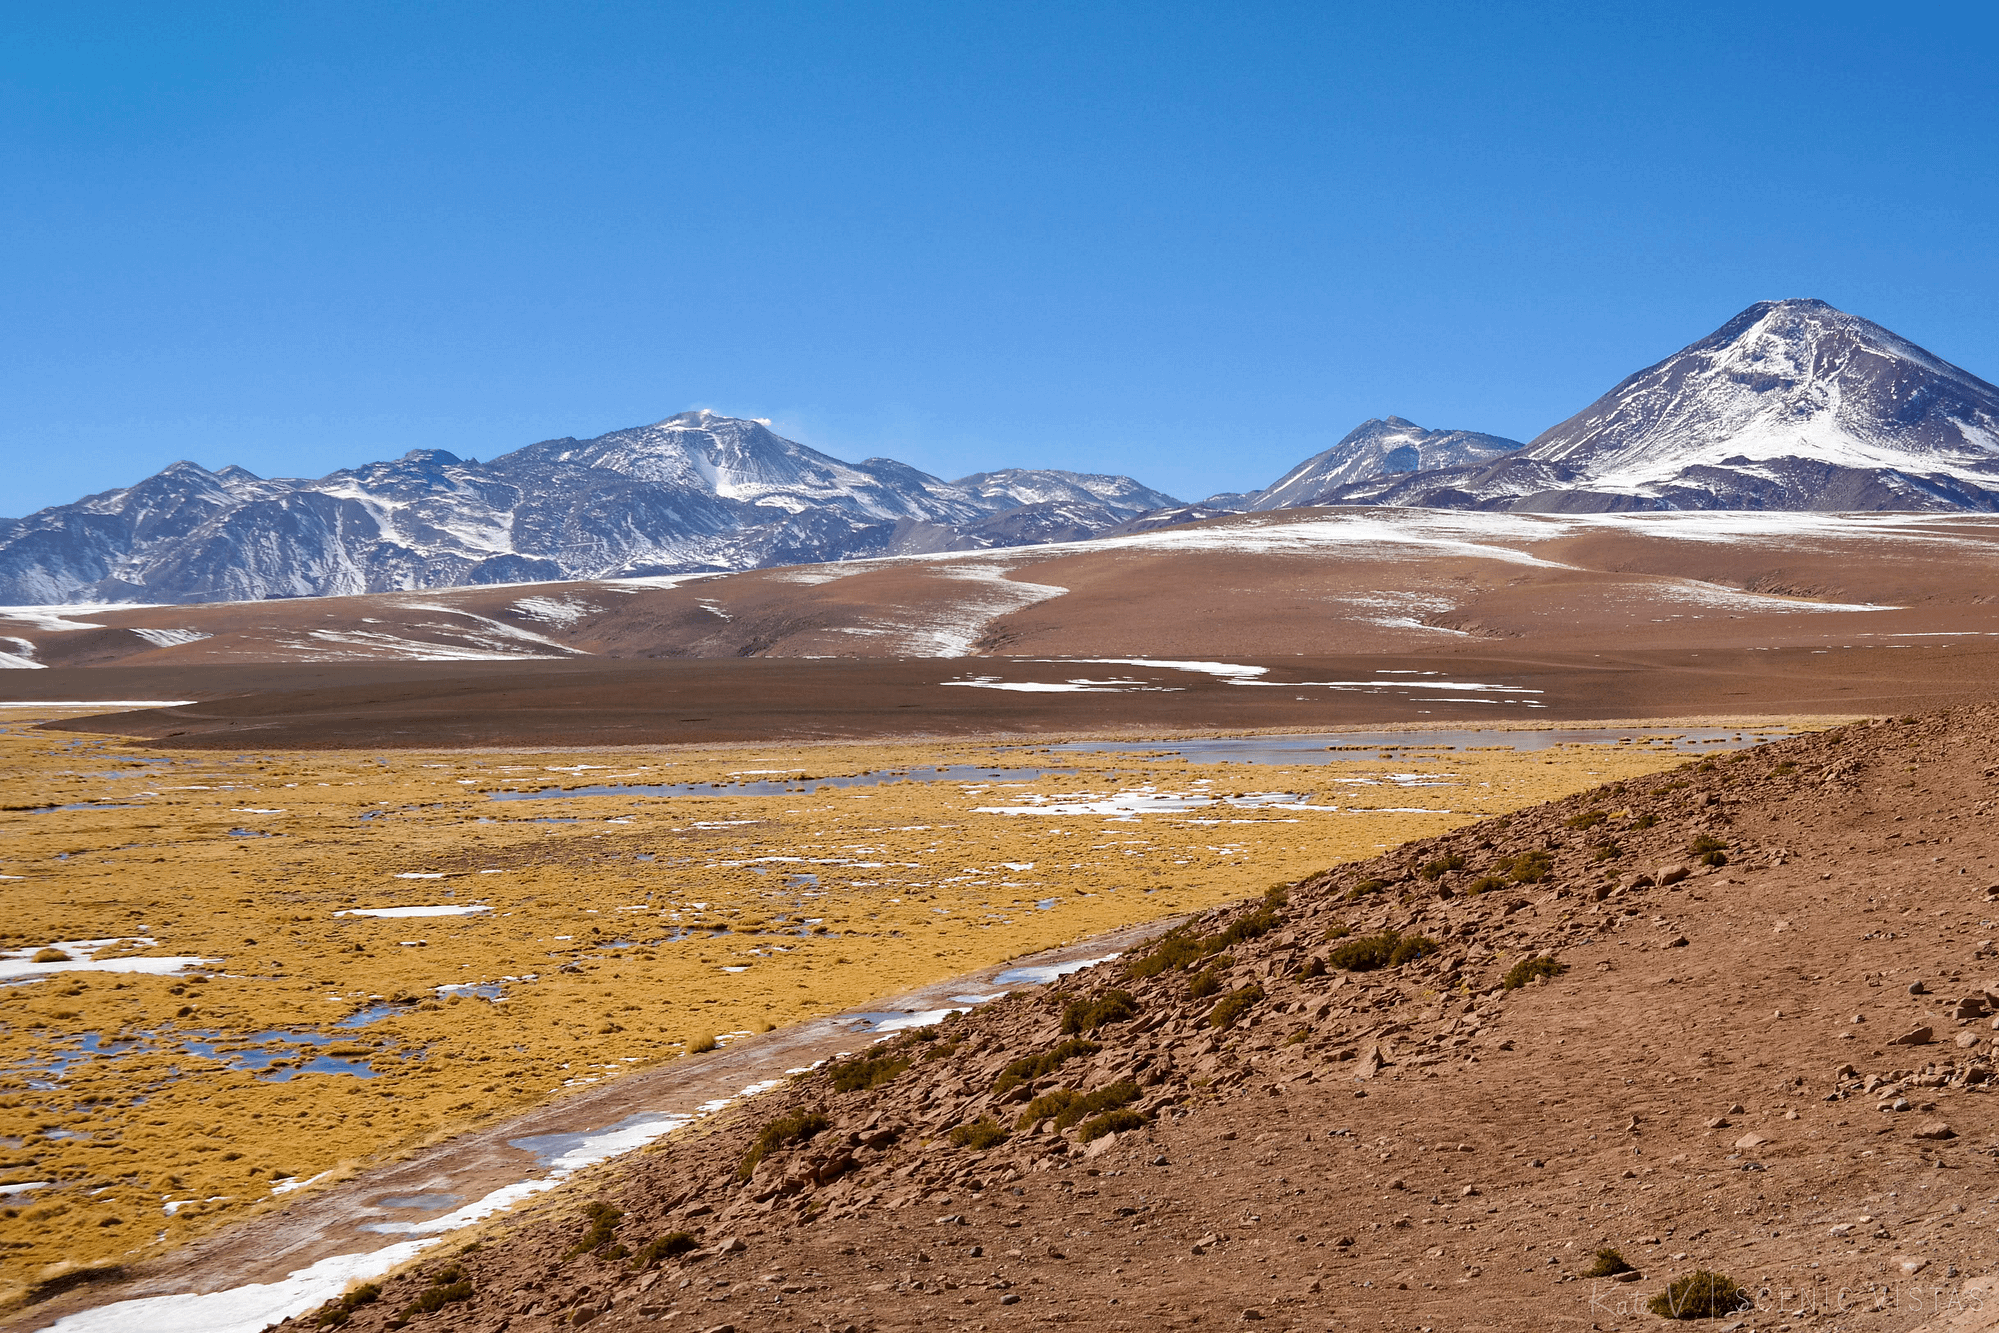 Snow-capped Andes mountains in the Atacama Desert